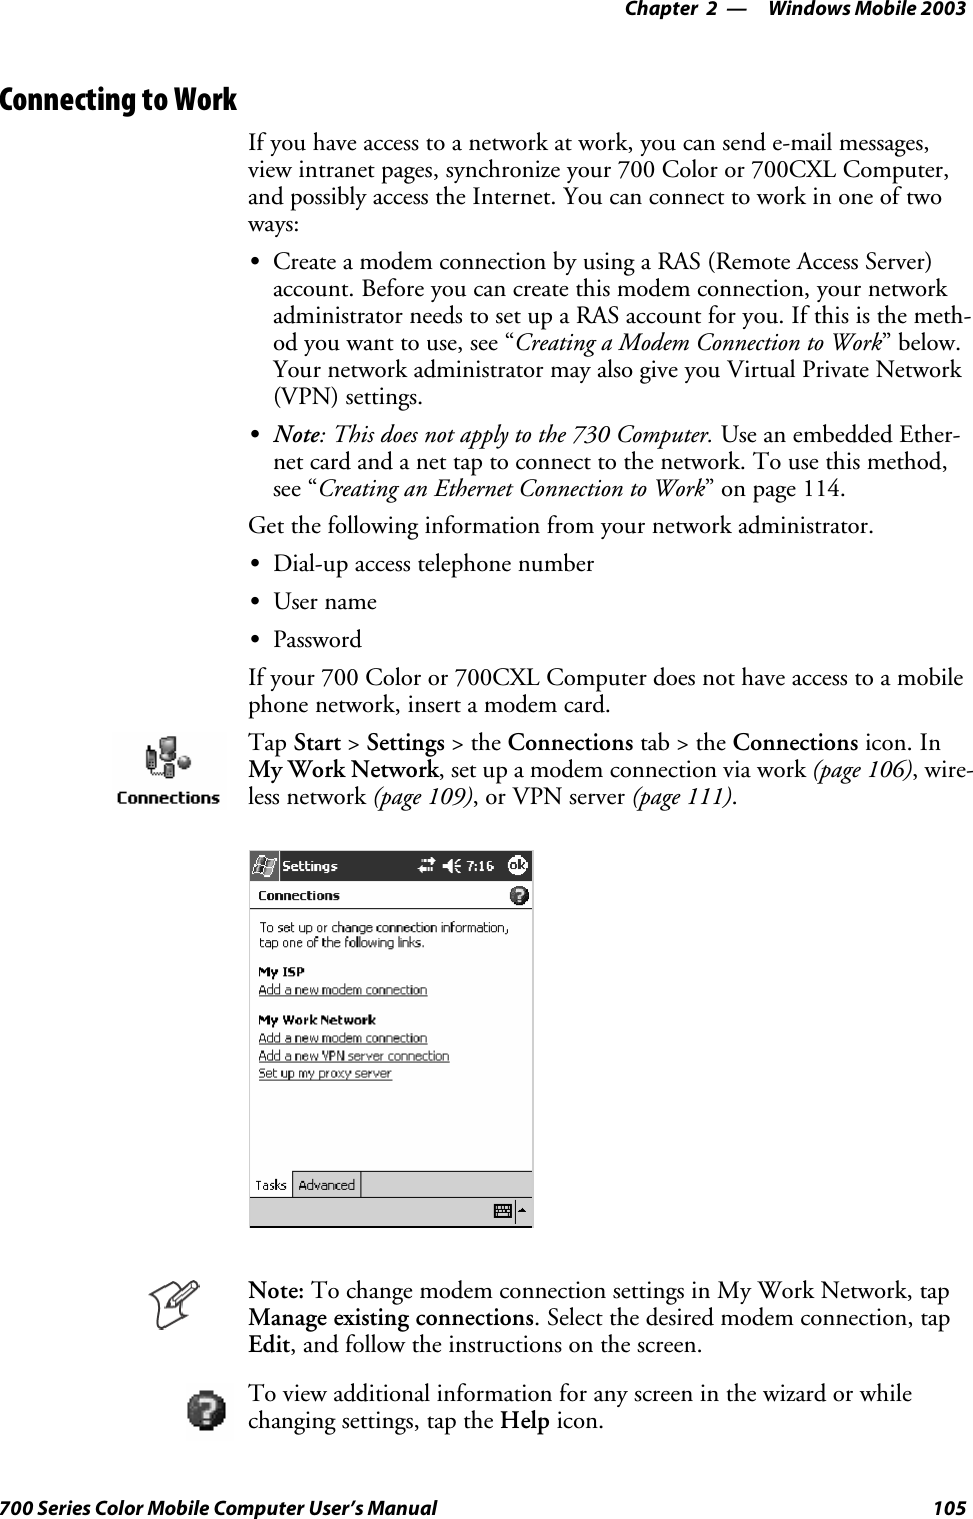 Windows Mobile 2003—Chapter 2105700 Series Color Mobile Computer User’s ManualConnecting to WorkIf you have access to a network at work, you can send e-mail messages,view intranet pages, synchronize your 700 Color or 700CXL Computer,and possibly access the Internet. You can connect to work in one of twoways:SCreate a modem connection by using a RAS (Remote Access Server)account. Before you can create this modem connection, your networkadministrator needs to set up a RAS account for you. If this is the meth-od you want to use, see “Creating a Modem Connection to Work”below.Your network administrator may also give you Virtual Private Network(VPN) settings.SNote:Thisdoesnotapplytothe730Computer.Use an embedded Ether-net card and a net tap to connect to the network. To use this method,see “Creating an Ethernet Connection to Work” on page 114.Get the following information from your network administrator.SDial-up access telephone numberSUser nameSPasswordIf your 700 Color or 700CXL Computer does not have access to a mobilephone network, insert a modem card.Tap Start &gt;Settings &gt;theConnections tab&gt;theConnections icon. InMy Work Network, set up a modem connection via work (page 106),wire-less network (page 109),orVPNserver(page 111).Note: To change modem connection settings in My Work Network, tapManage existing connections. Select the desired modem connection, tapEdit, and follow the instructions on the screen.To view additional information for any screen in the wizard or whilechanging settings, tap the Help icon.